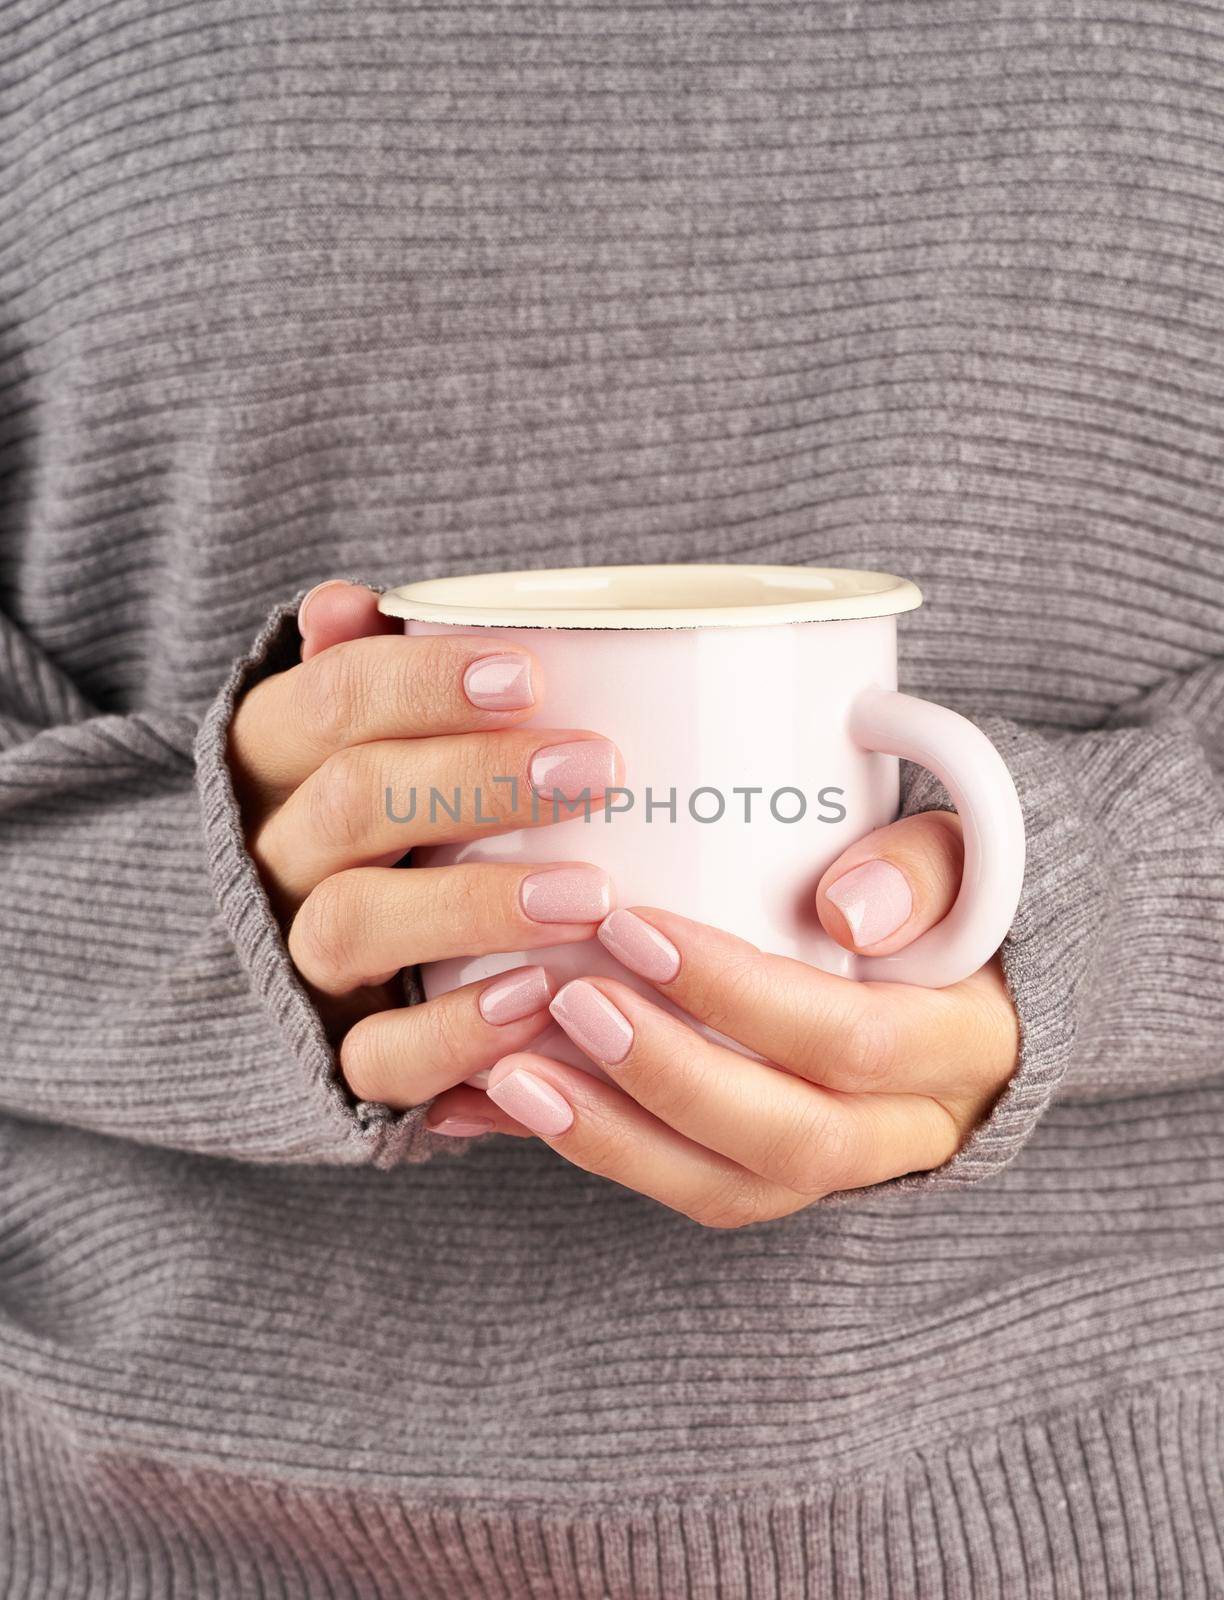 morning hot coffee at work on a cold autumn morning, hands holding a mug with a drink, gray sweater, pink manicure, close up, vertical by NataBene